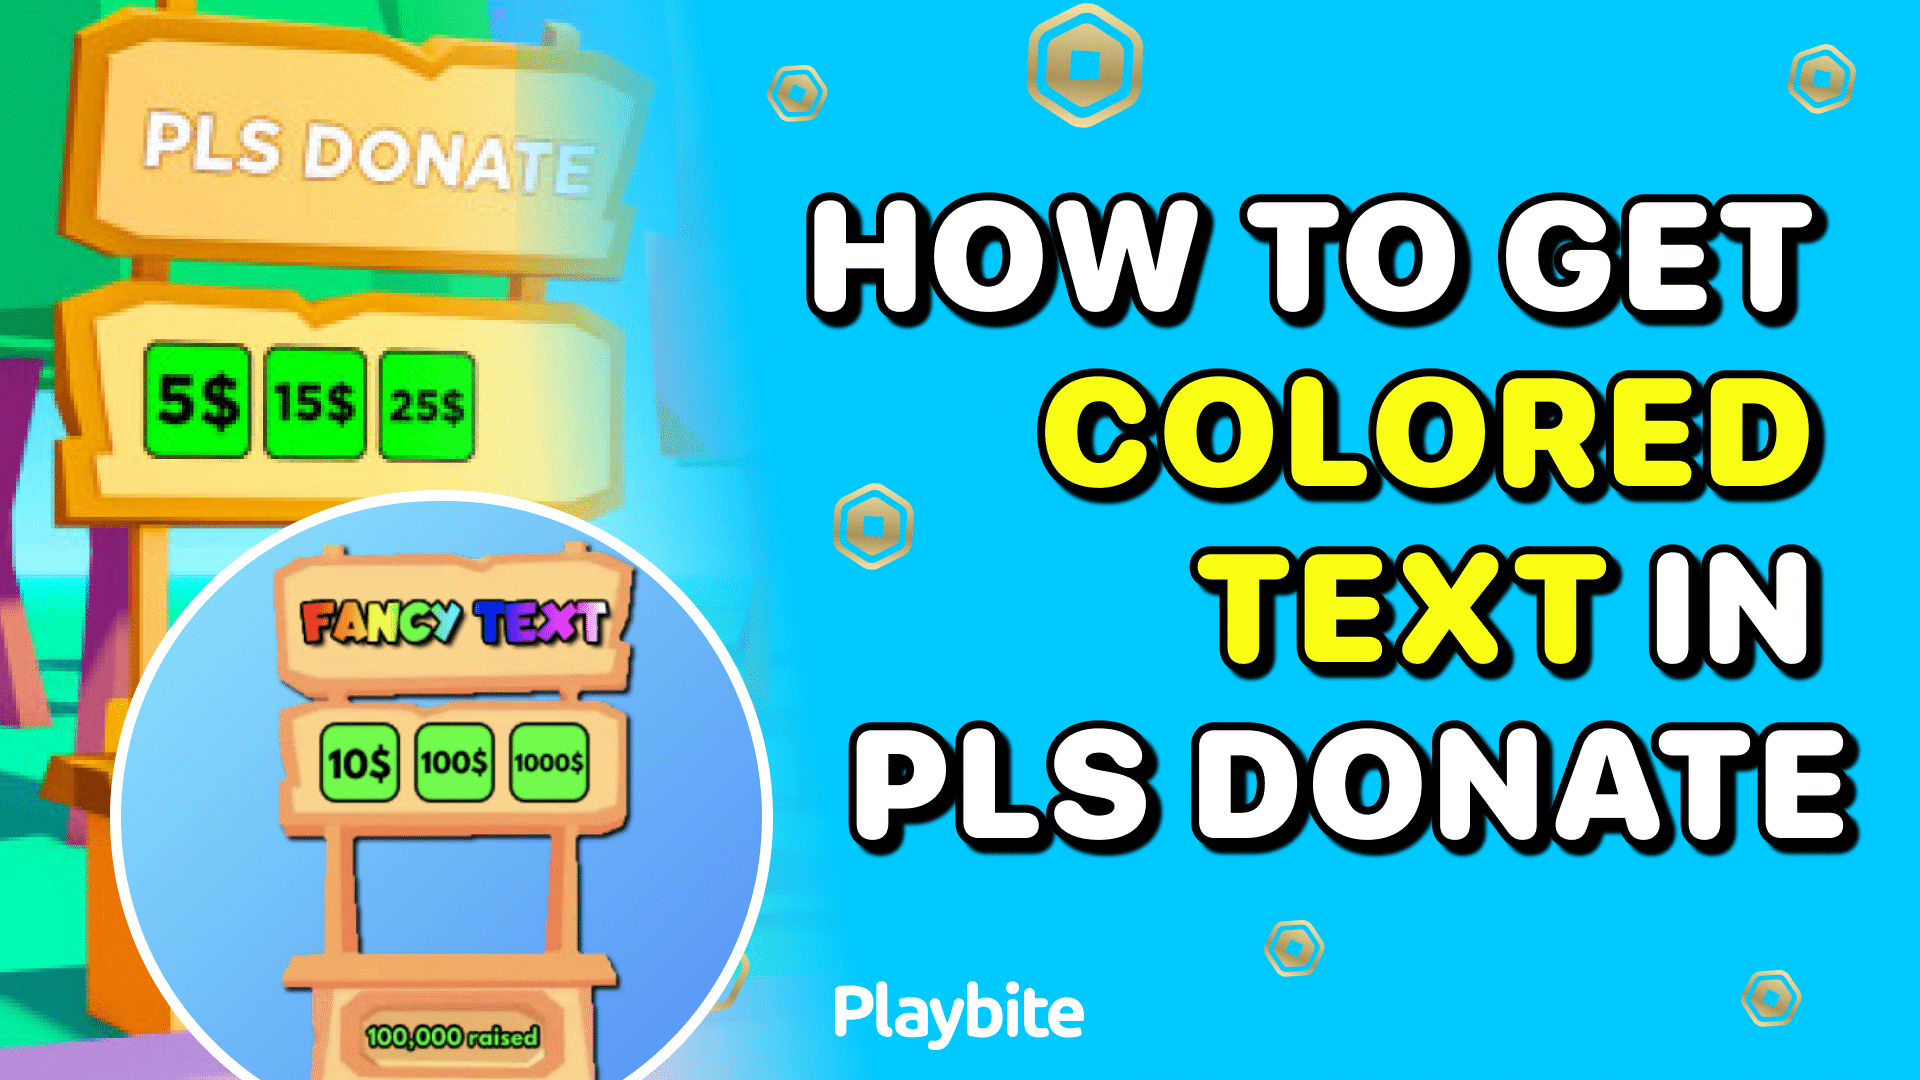 How To Get Colored Text In PLS DONATE - Playbite